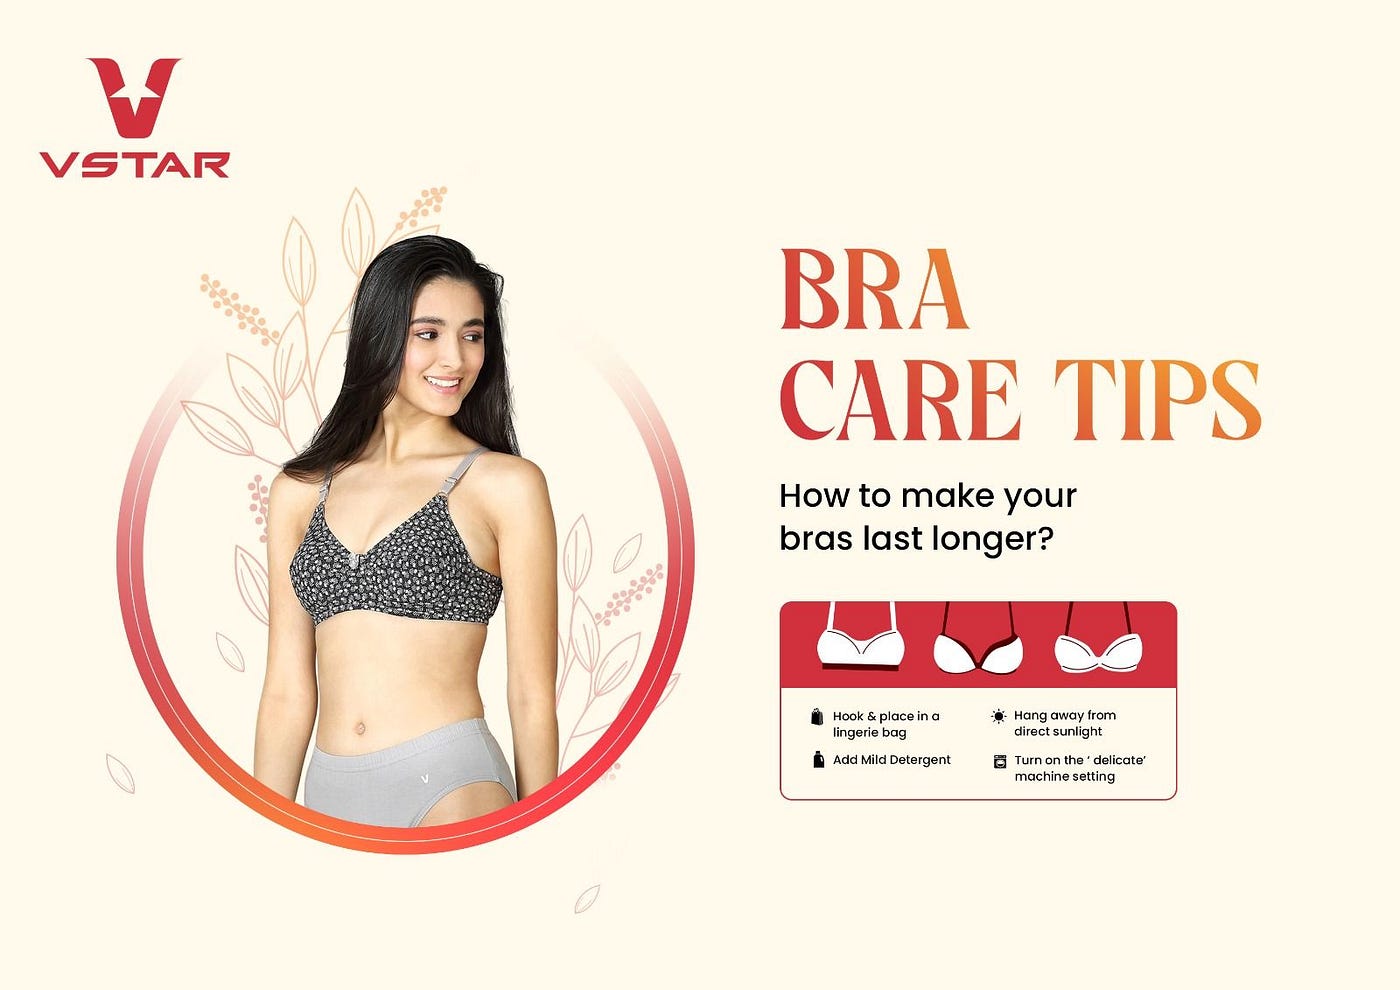 How to wash your bras?